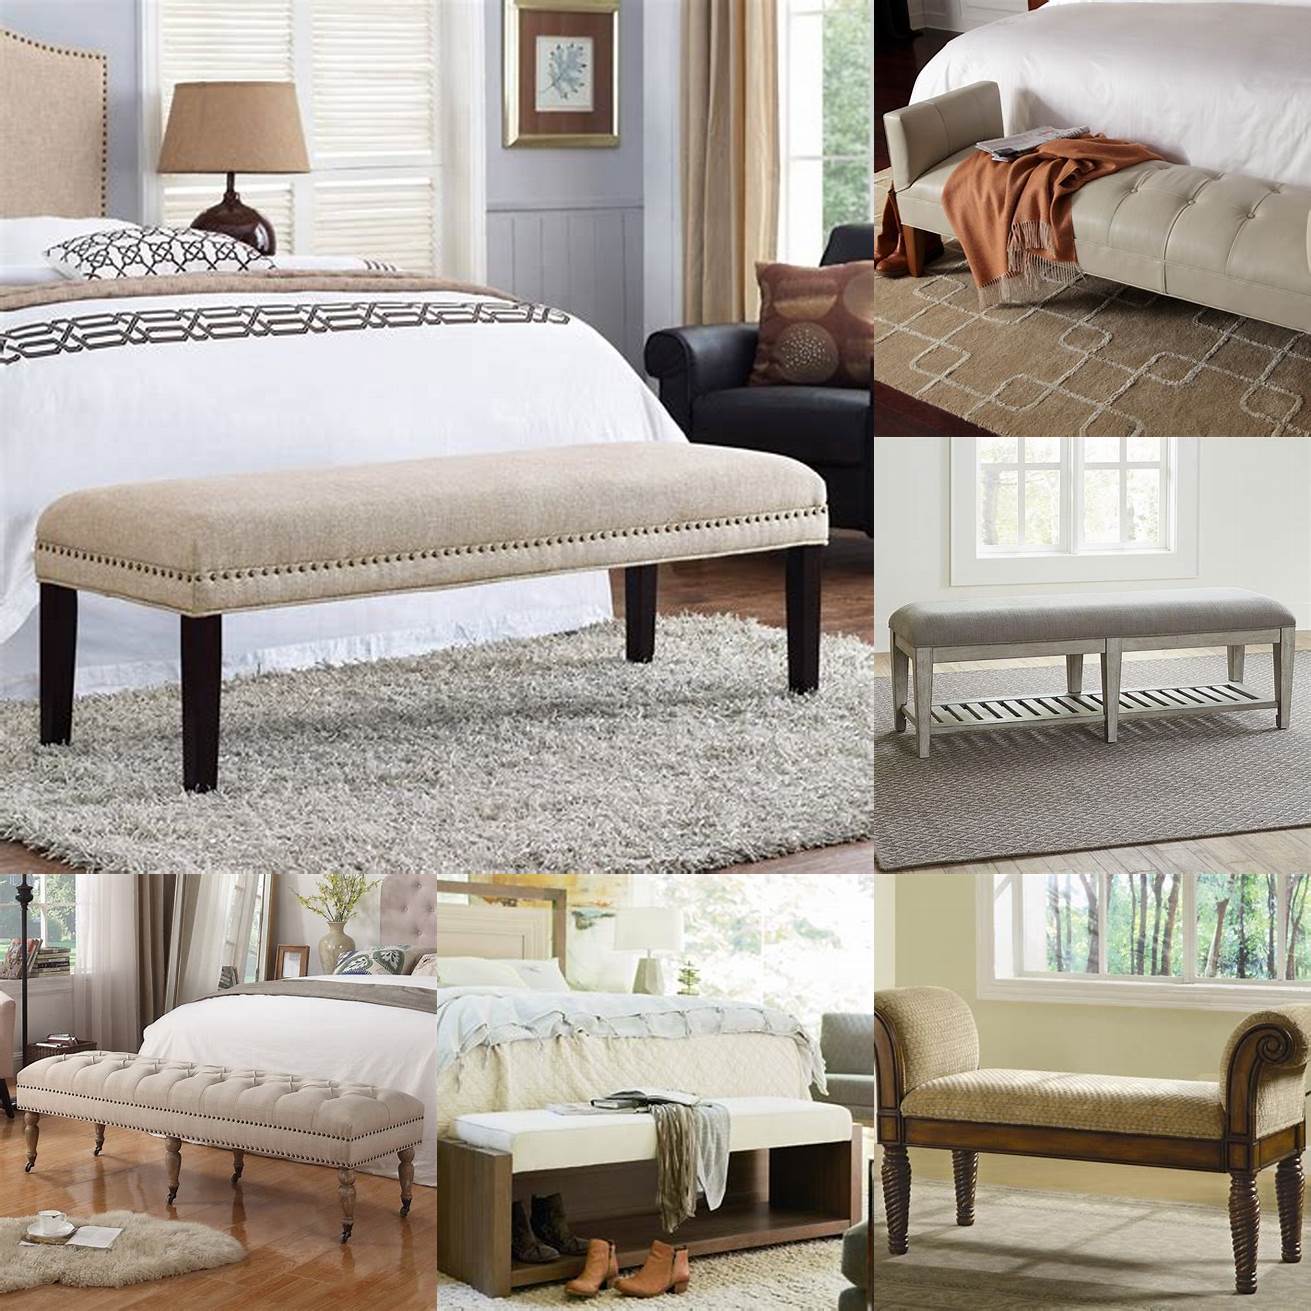 Comfort Last but not least a foot of bed bench can be a cozy and inviting addition to your sleeping area